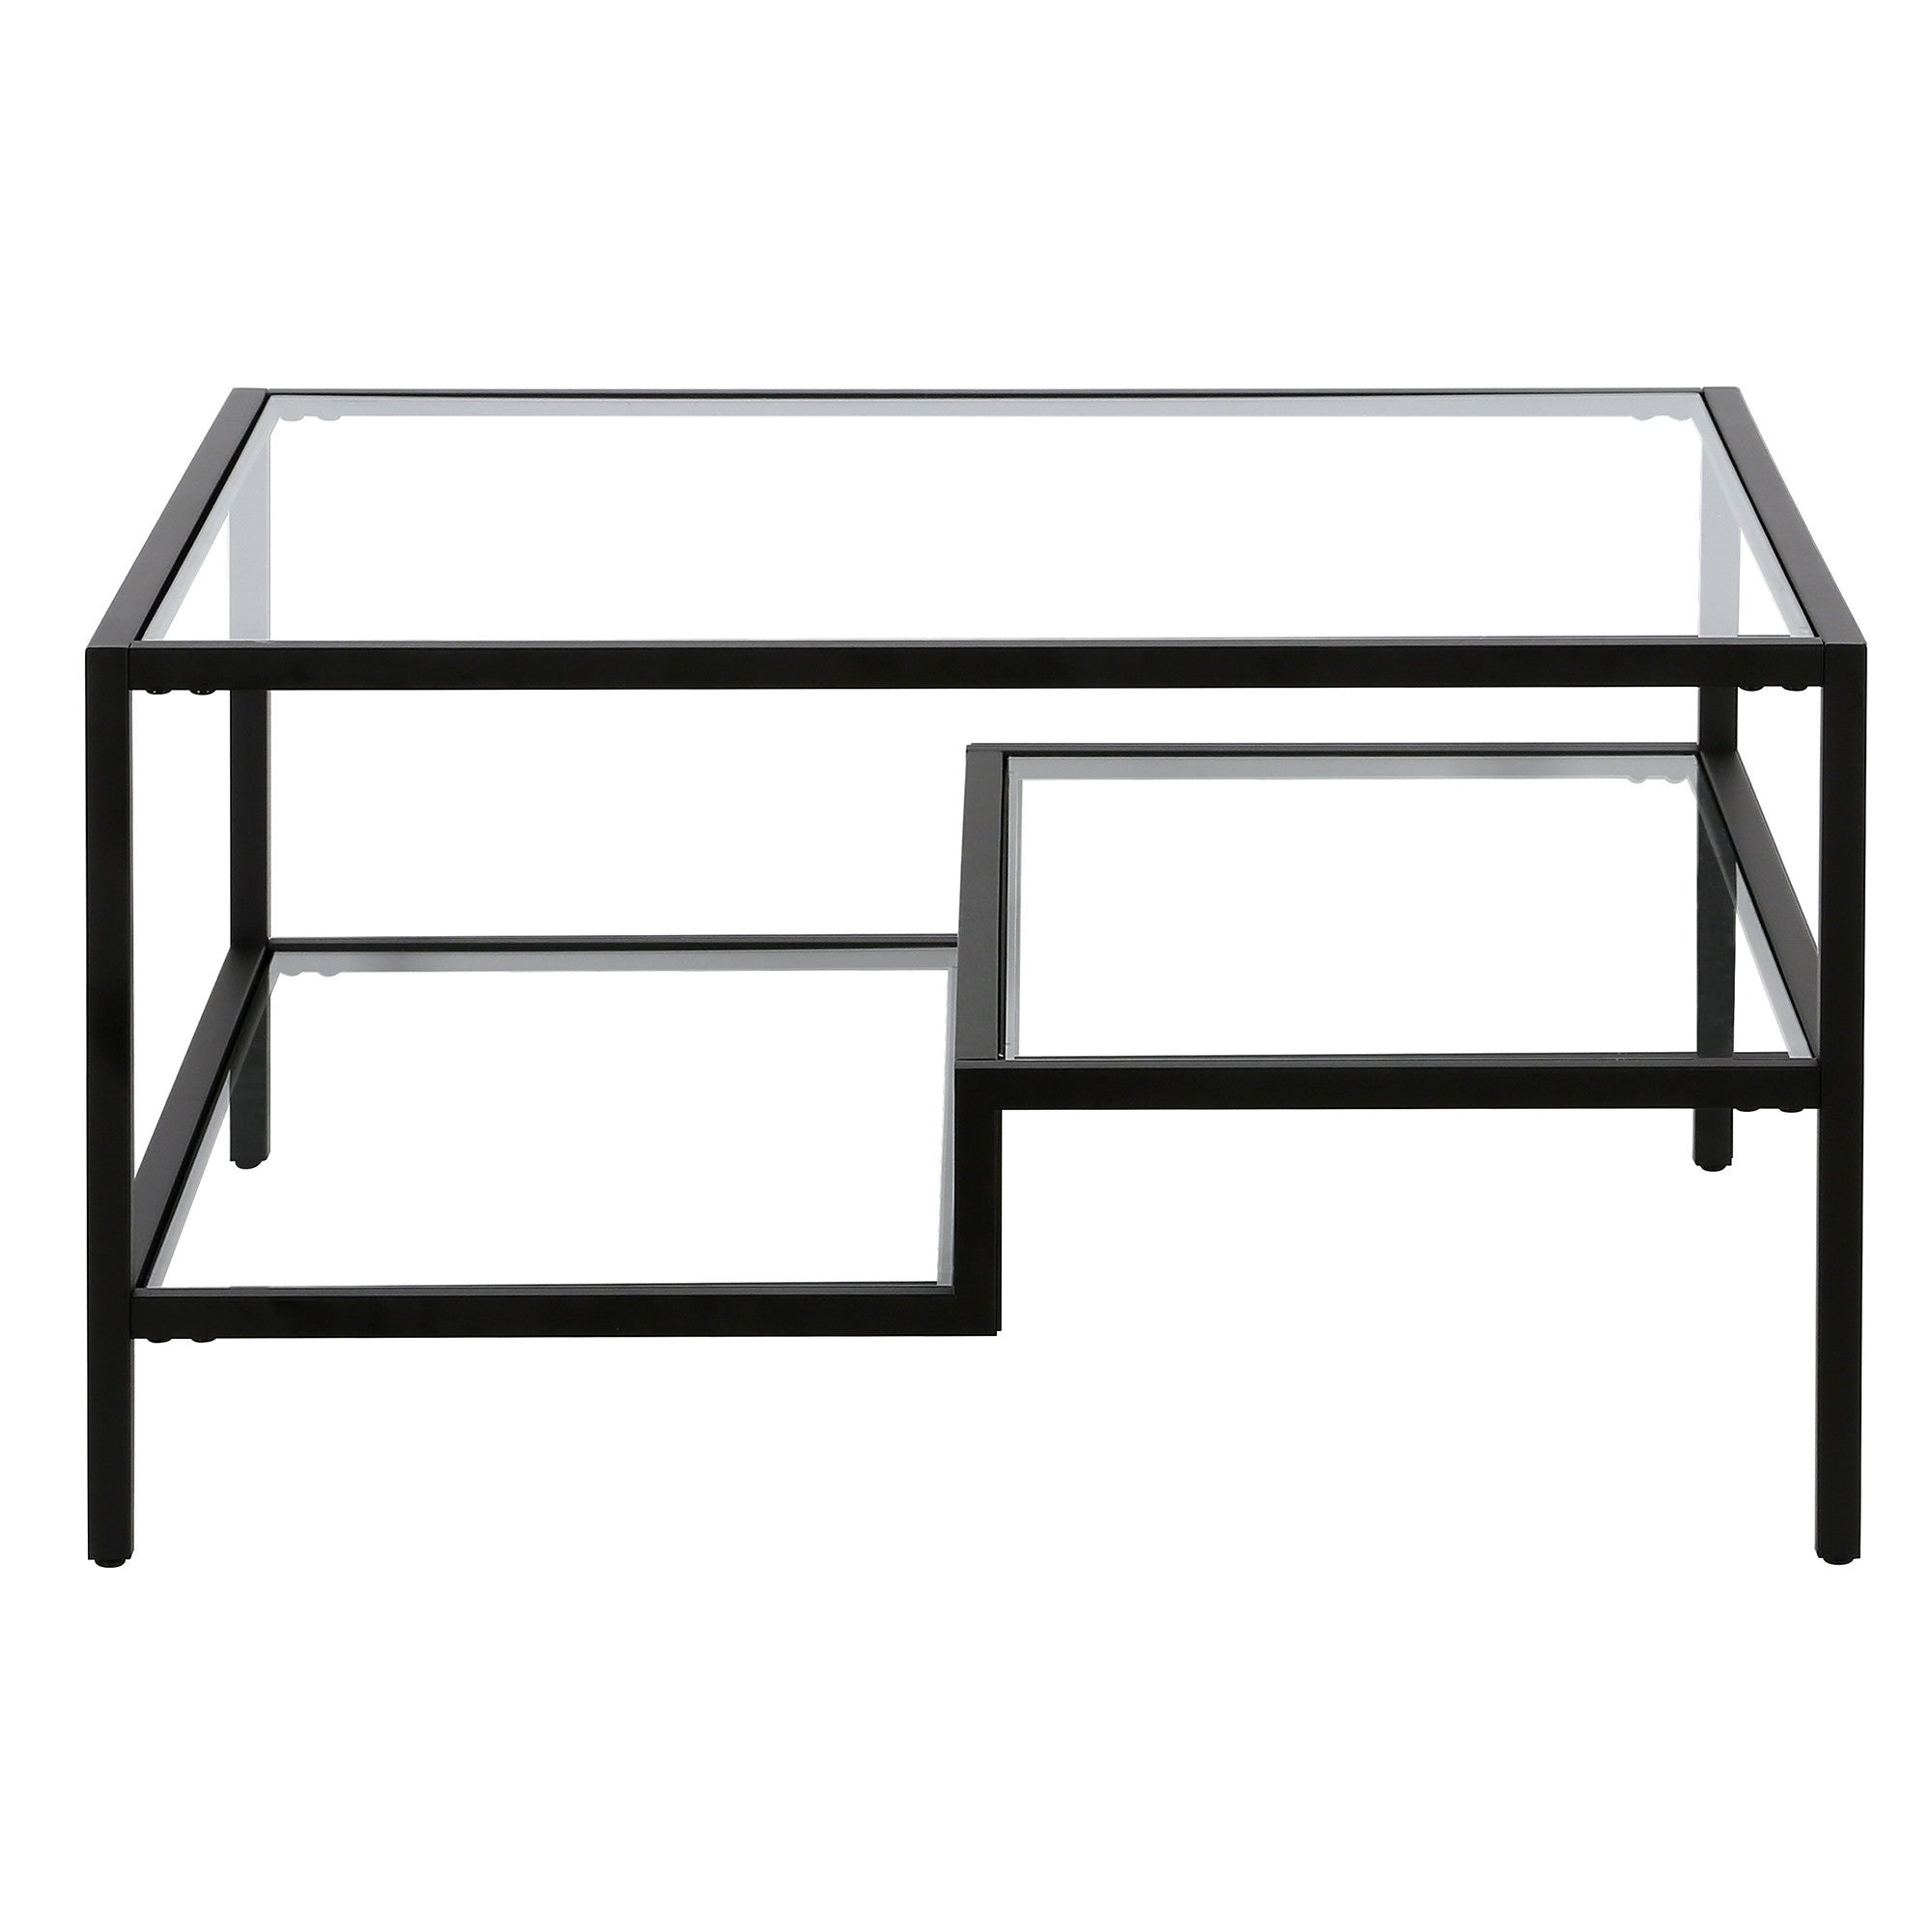 32" Black Glass And Steel Square Coffee Table With Two Shelves